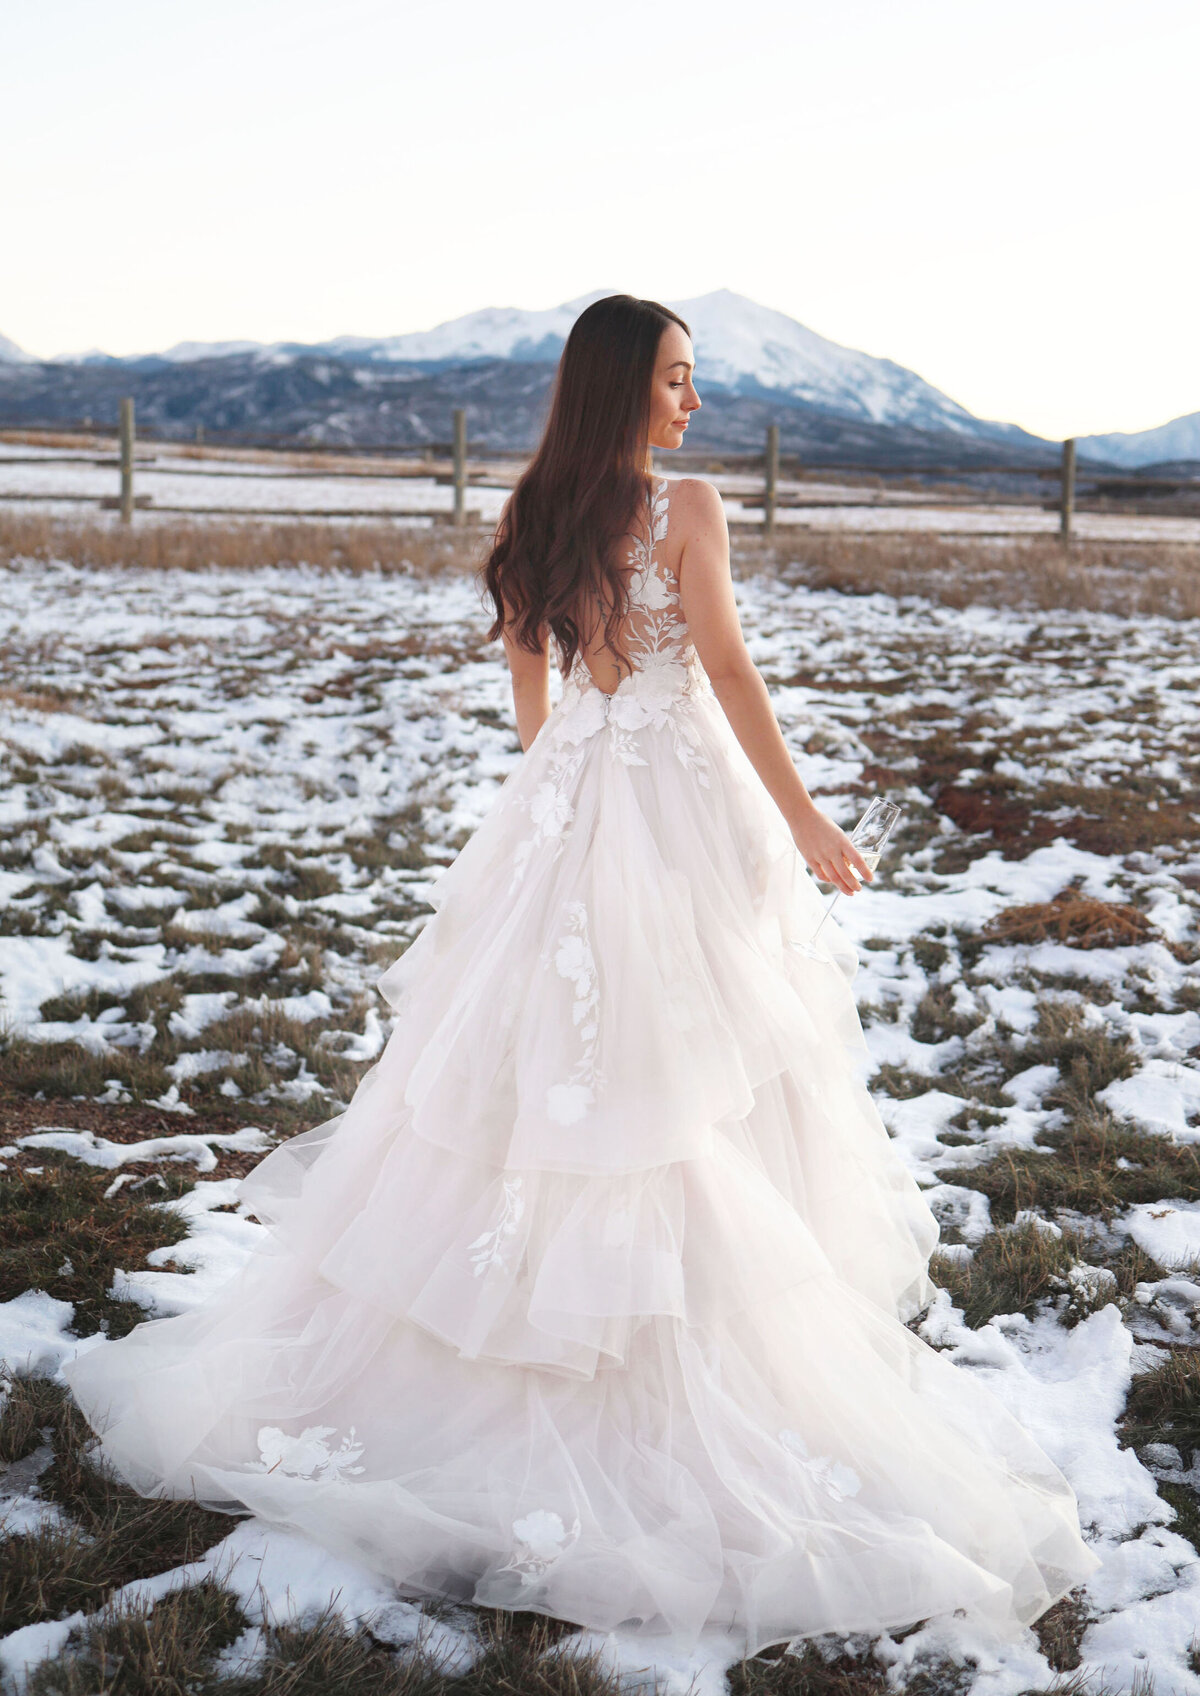 Bride in a gorgeous white wedding dress, having a moment alone in the snowy mountains.